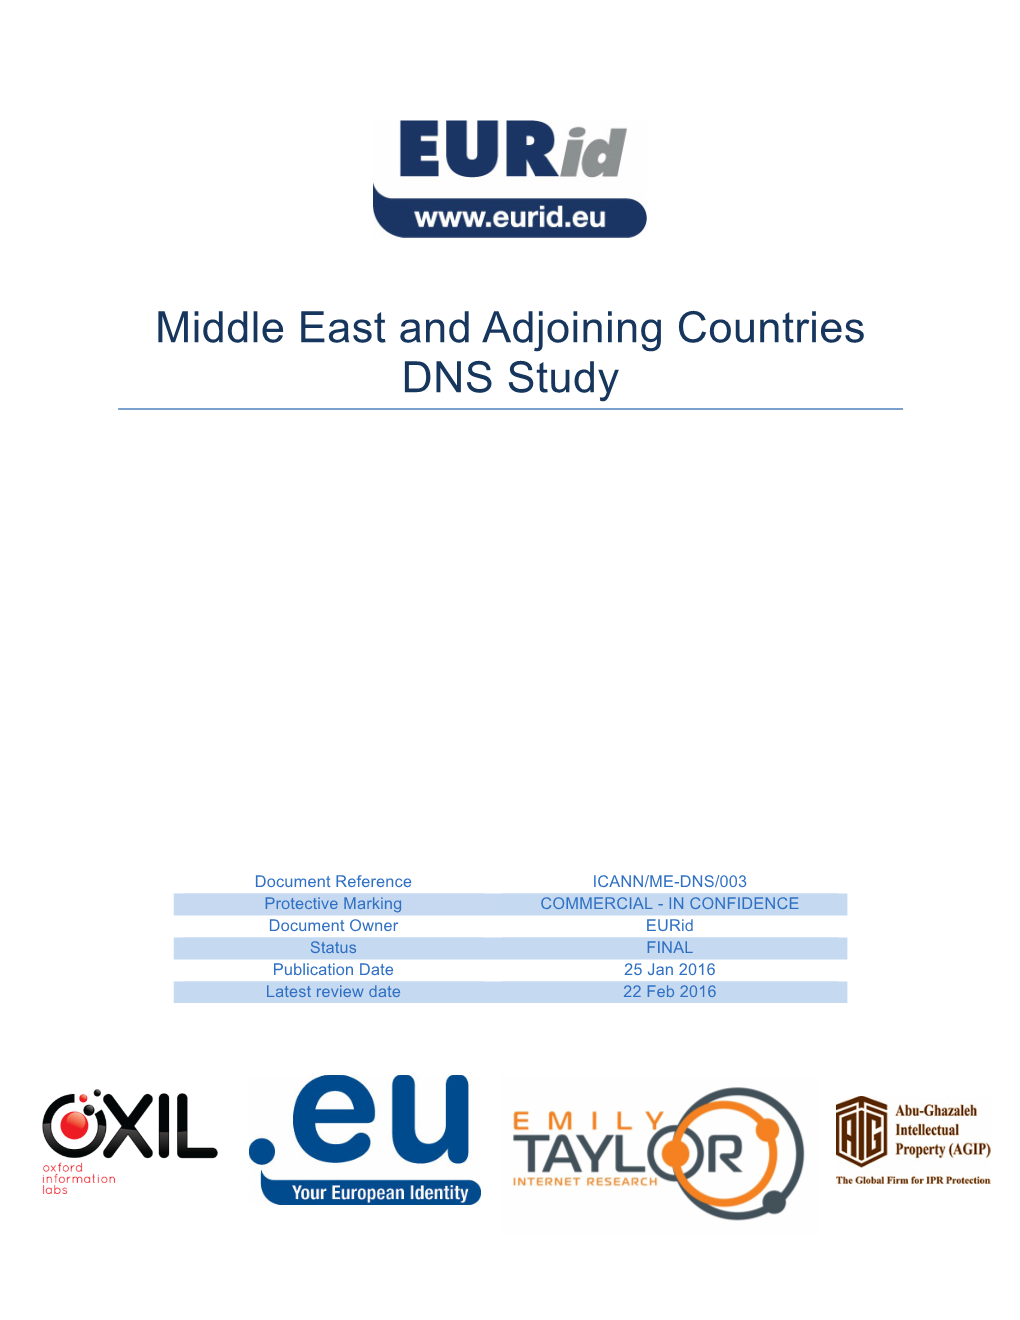 Middle East and Adjoining Countries DNS Study